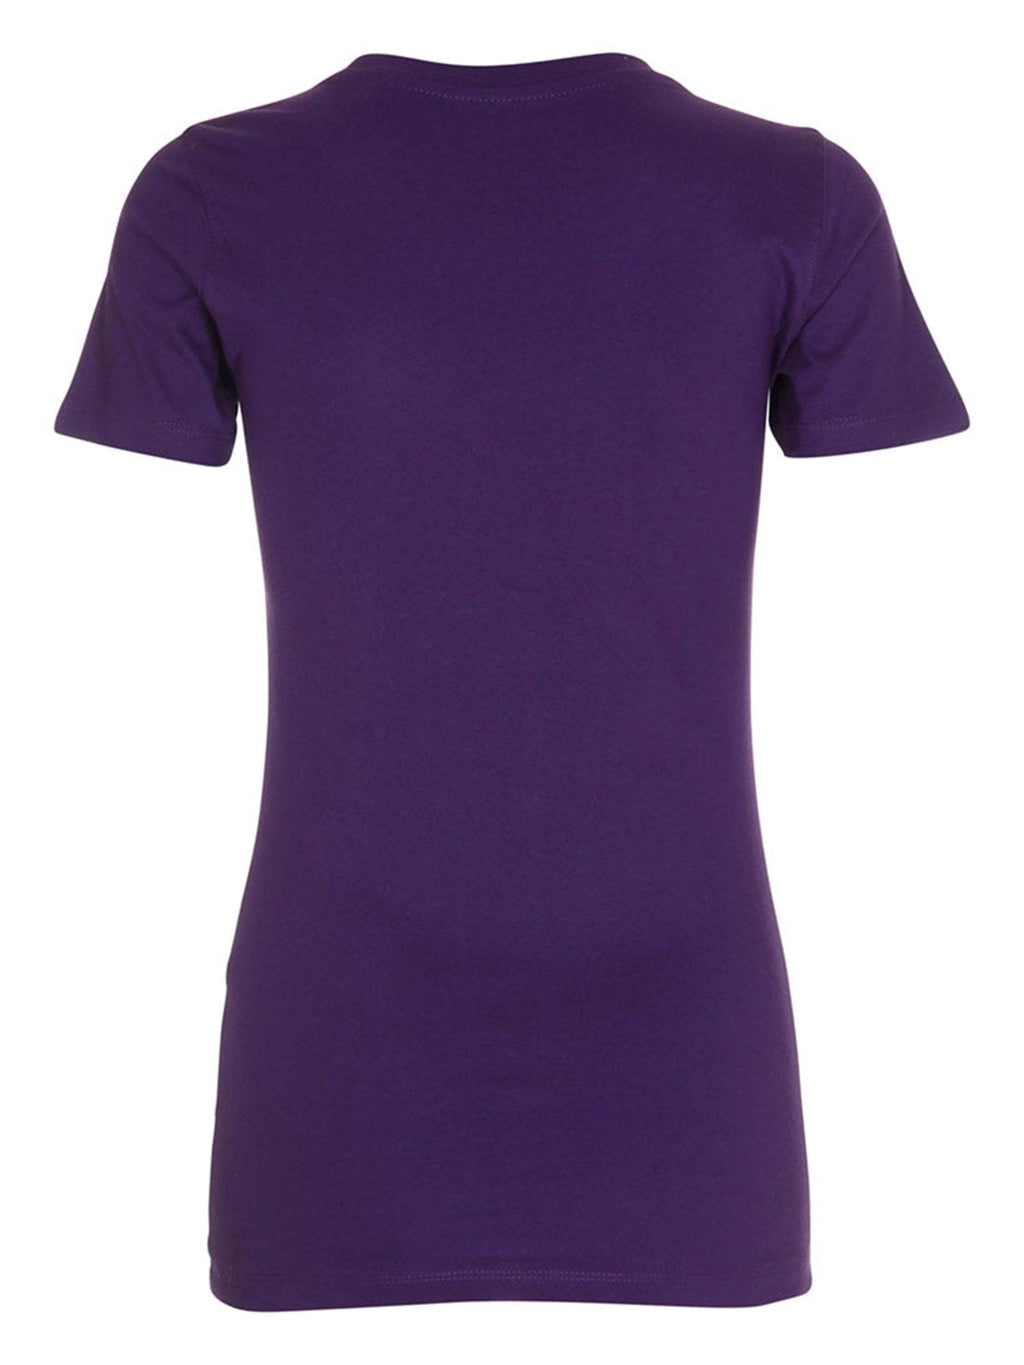 Fitted t-shirt – Purple